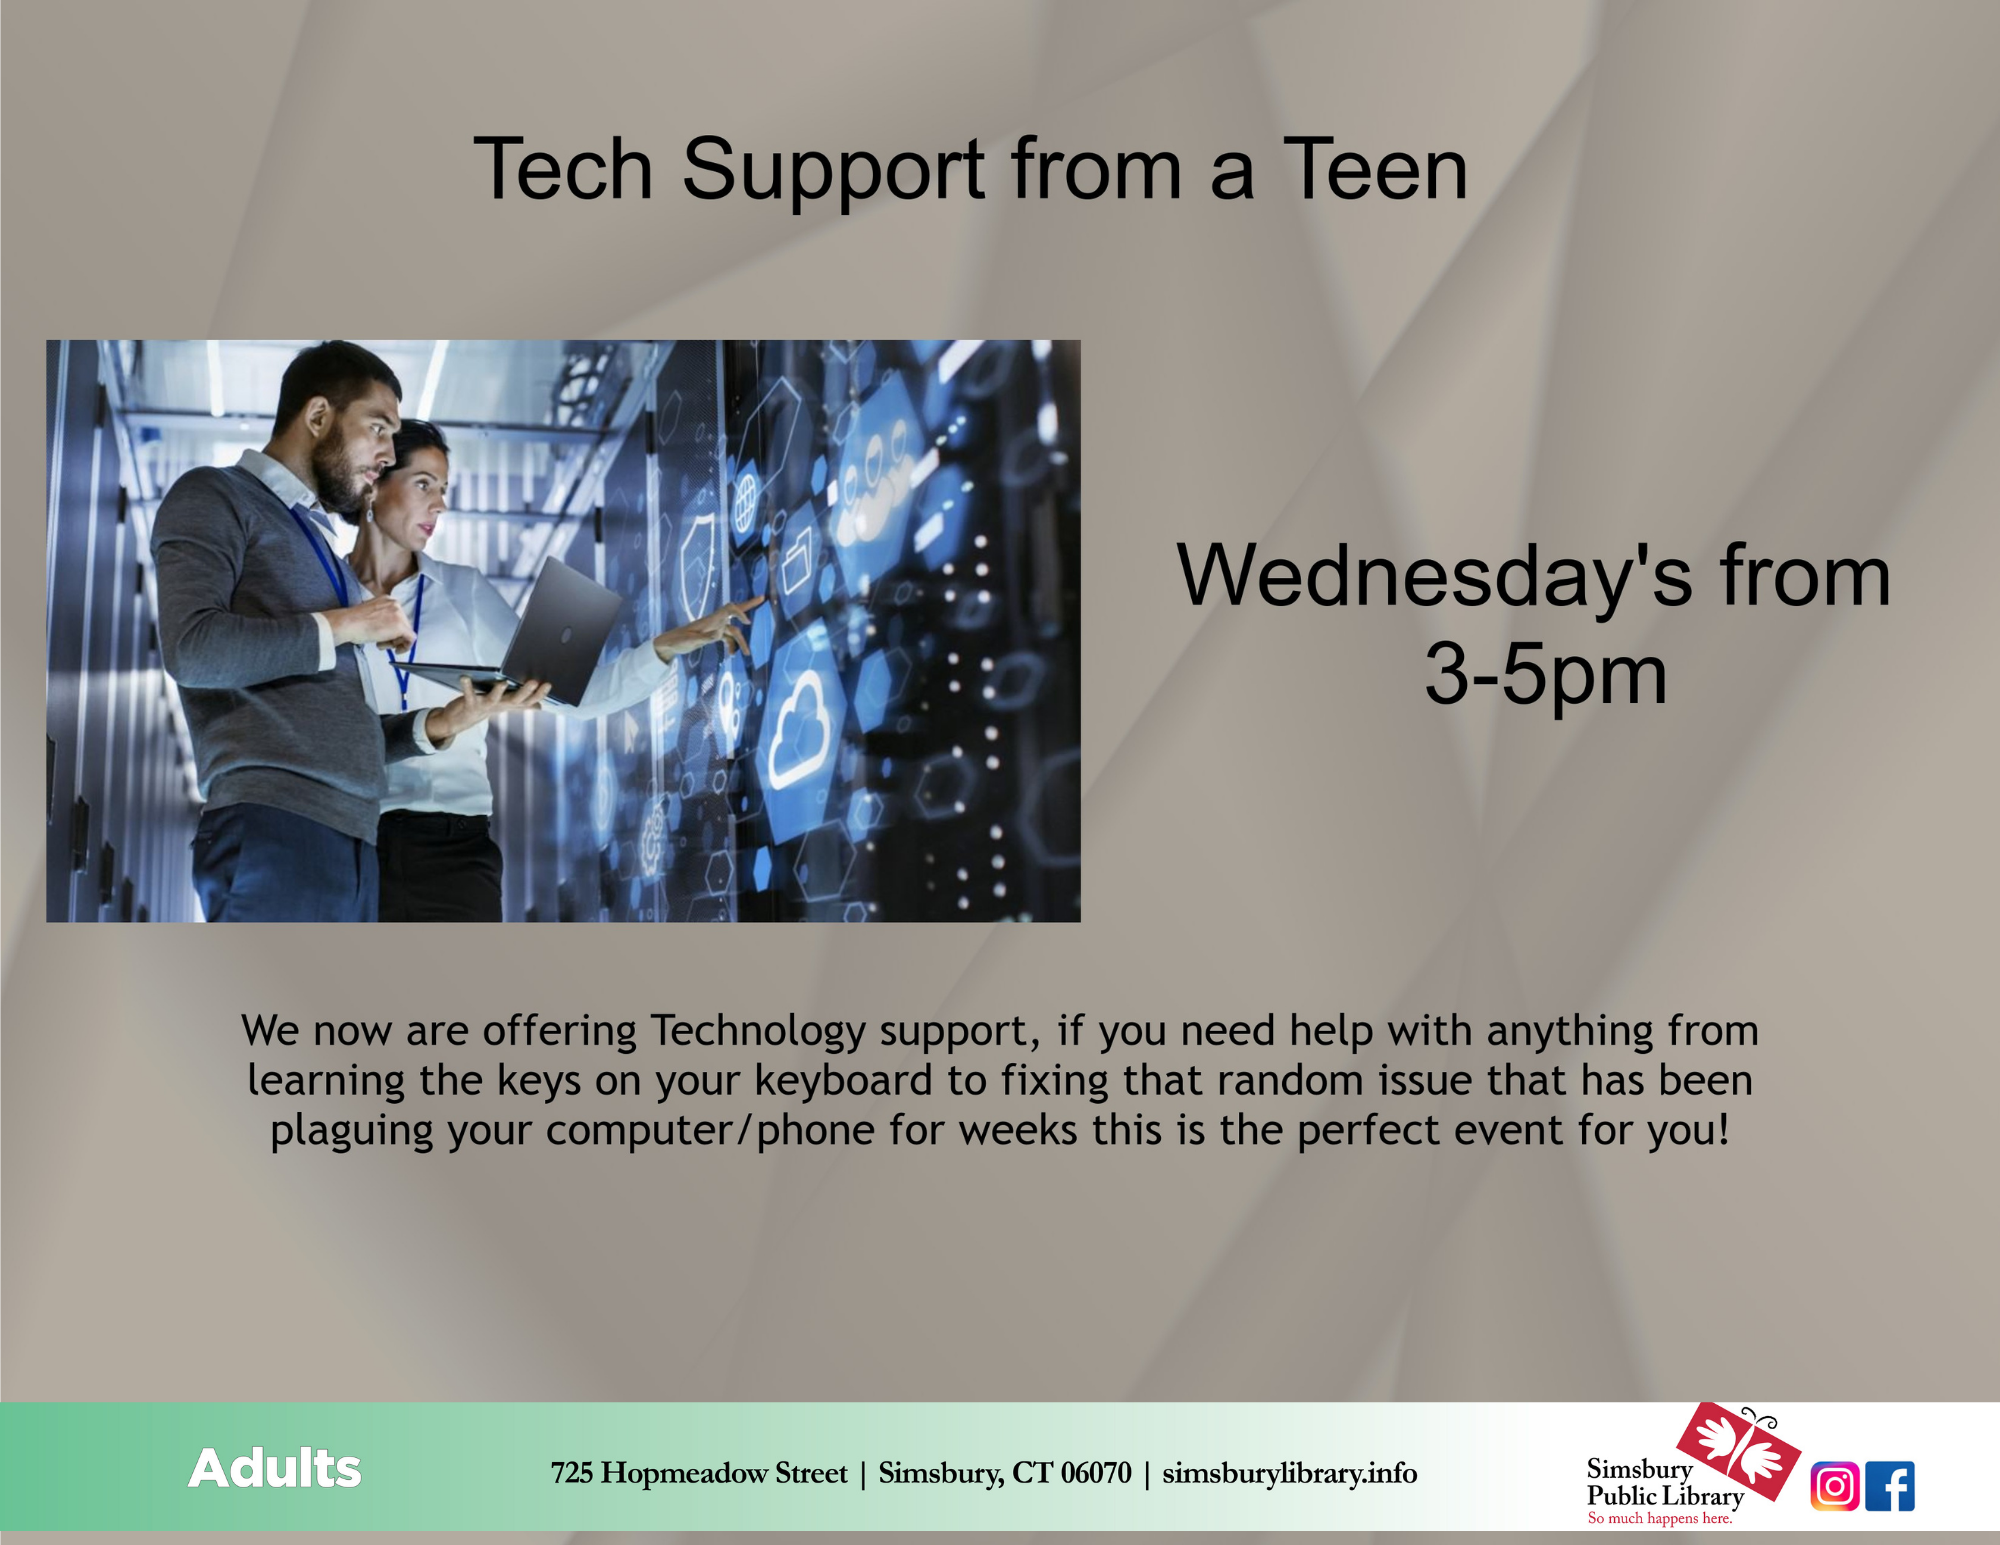 Tech Support with a Teen!